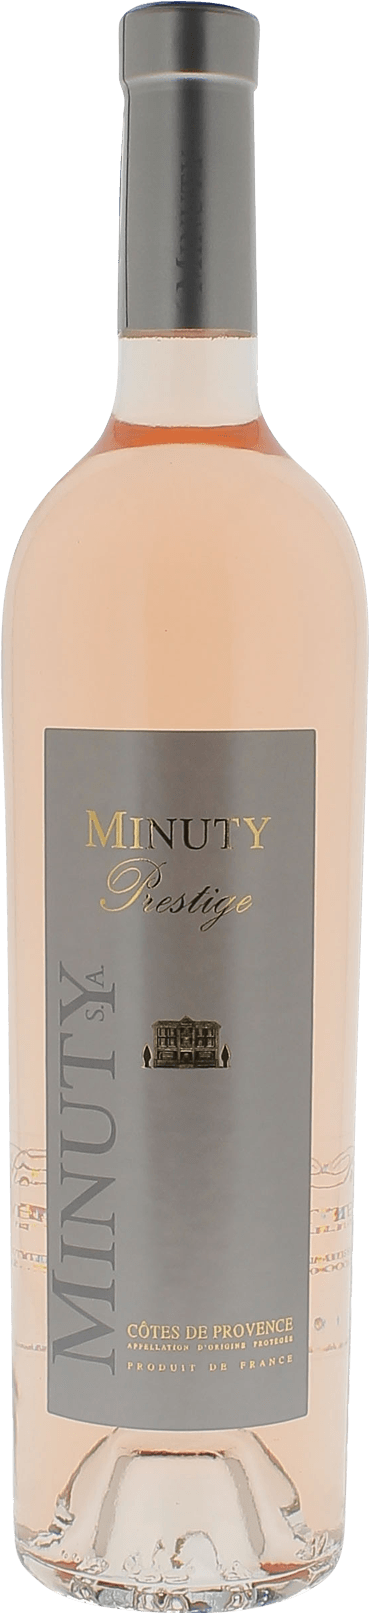 Minuty prestige ros 2018  Provence, Slection Provence ros